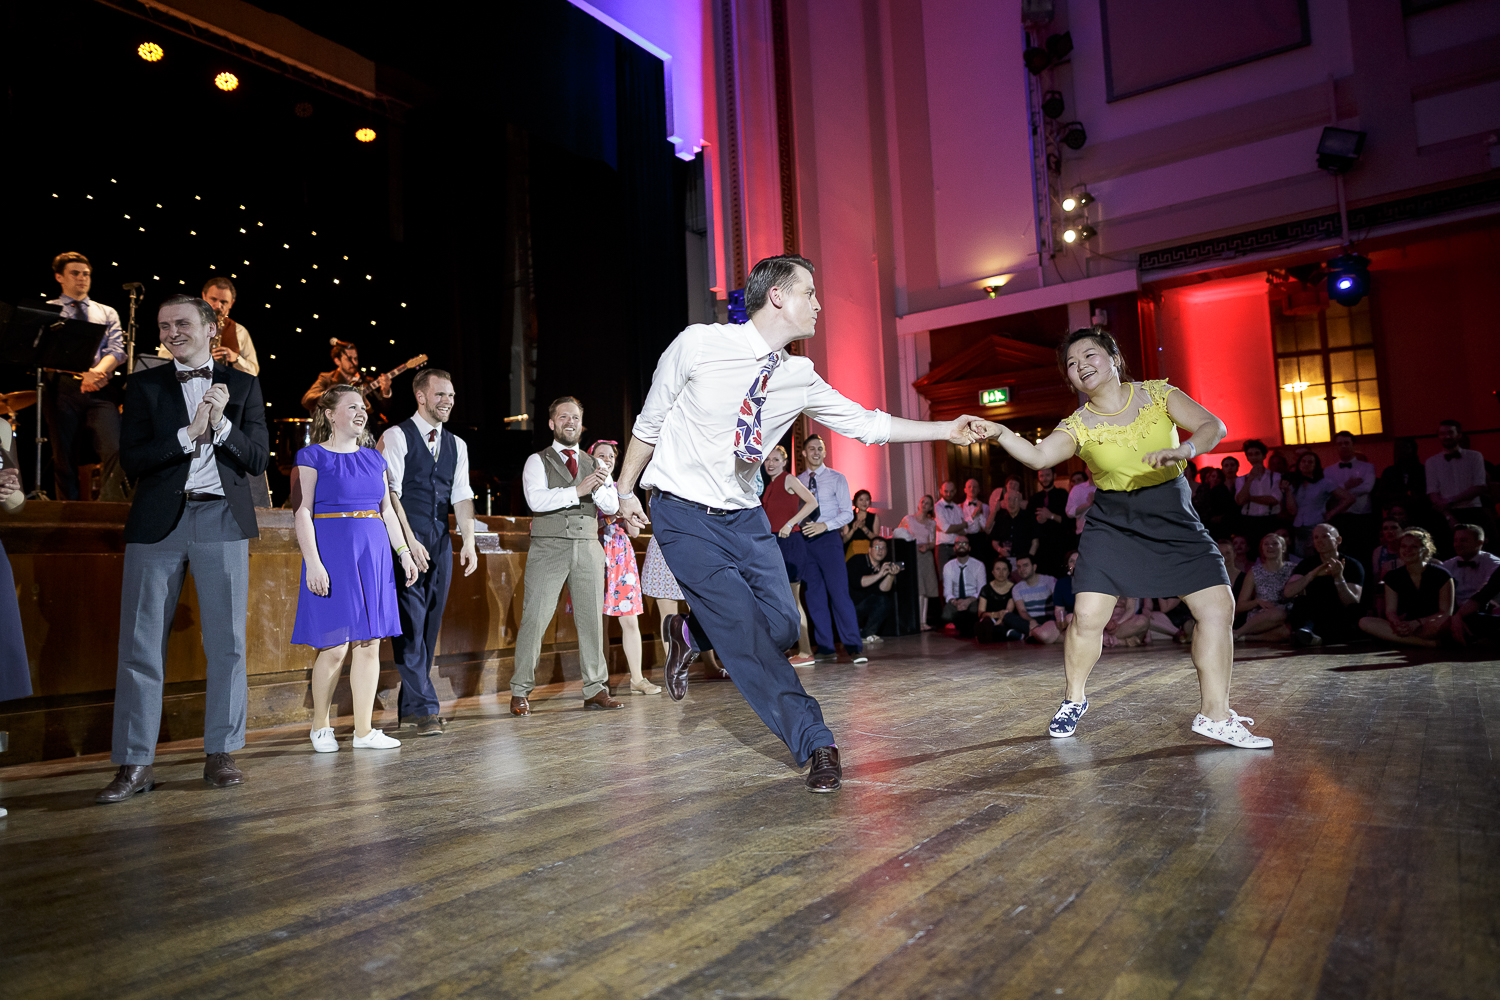  The London Swing Festival 2015 - Saturday Night. Photo Credit: For Dancers Only (http://d.pr/1fEEY) - http://www.ebobrie.com/london-swing-festival-2015/ 